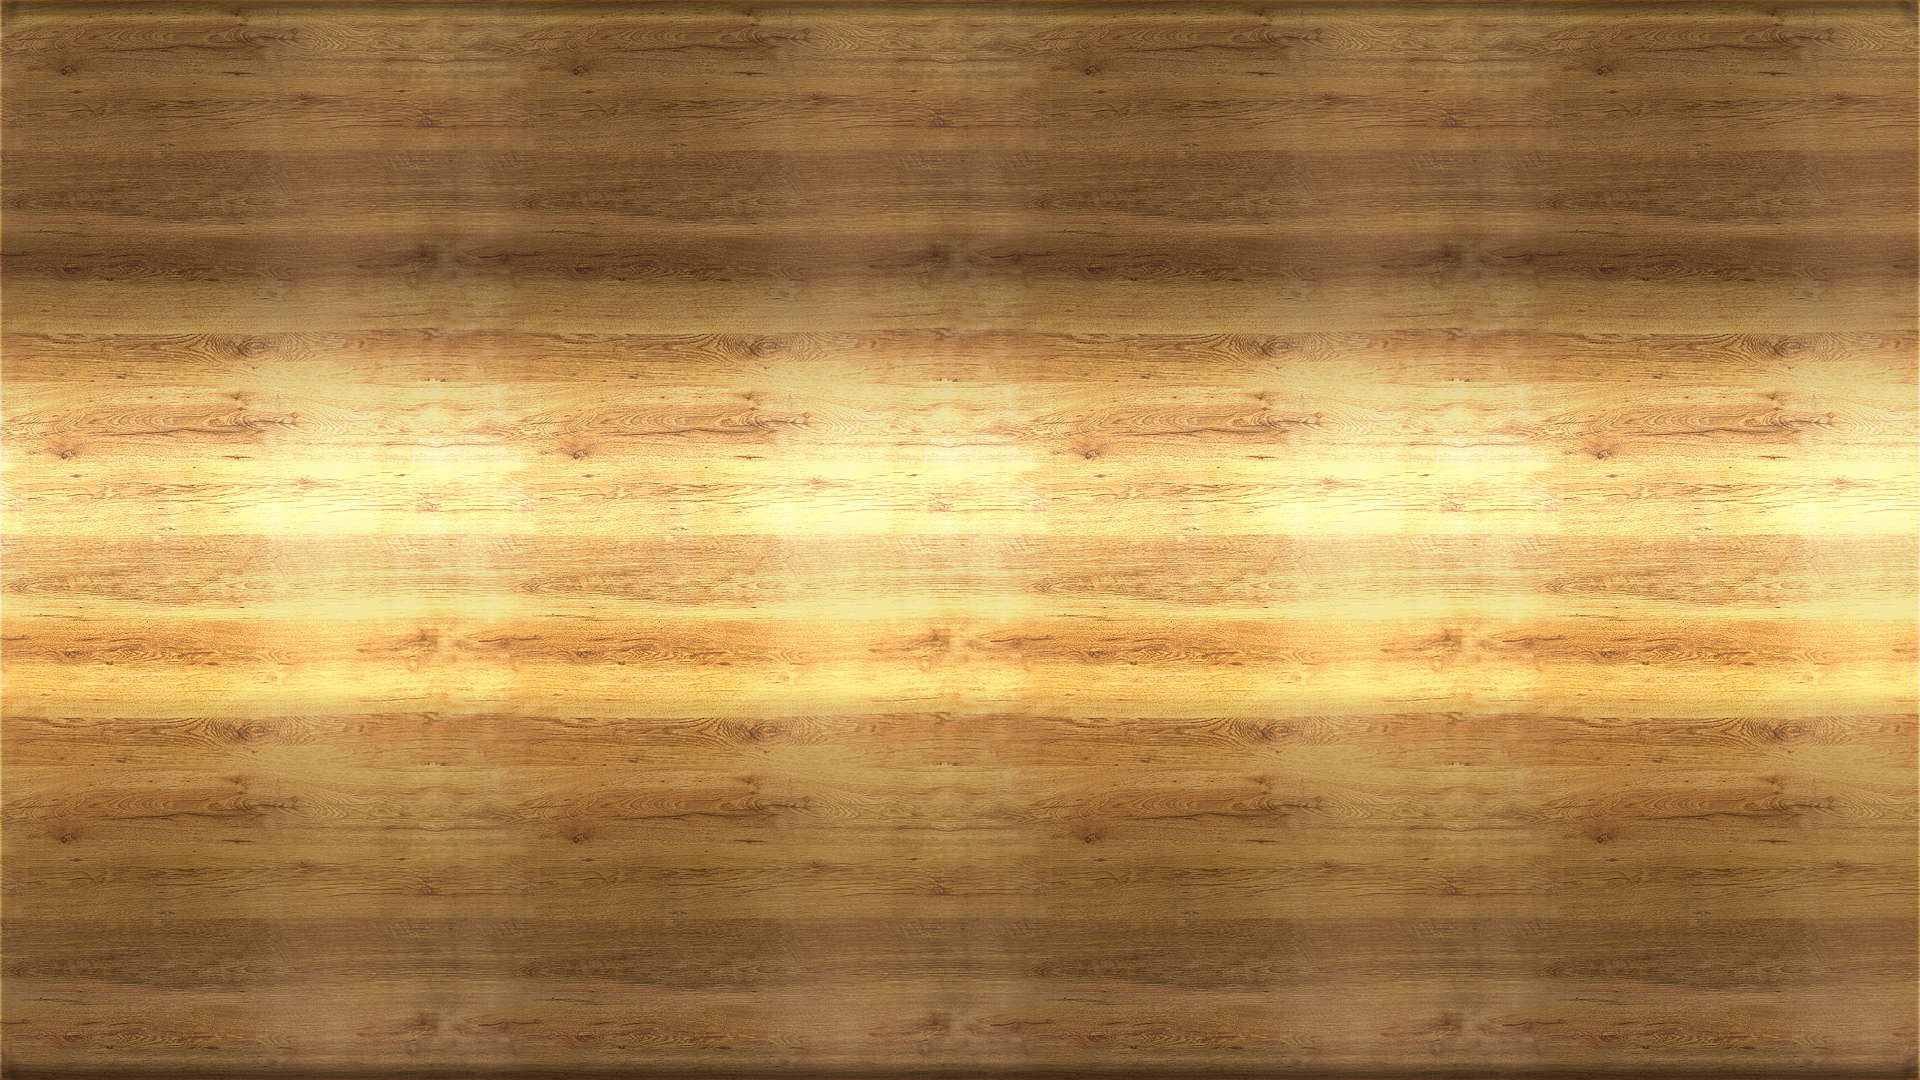 General 1920x1080 wood wooden surface texture